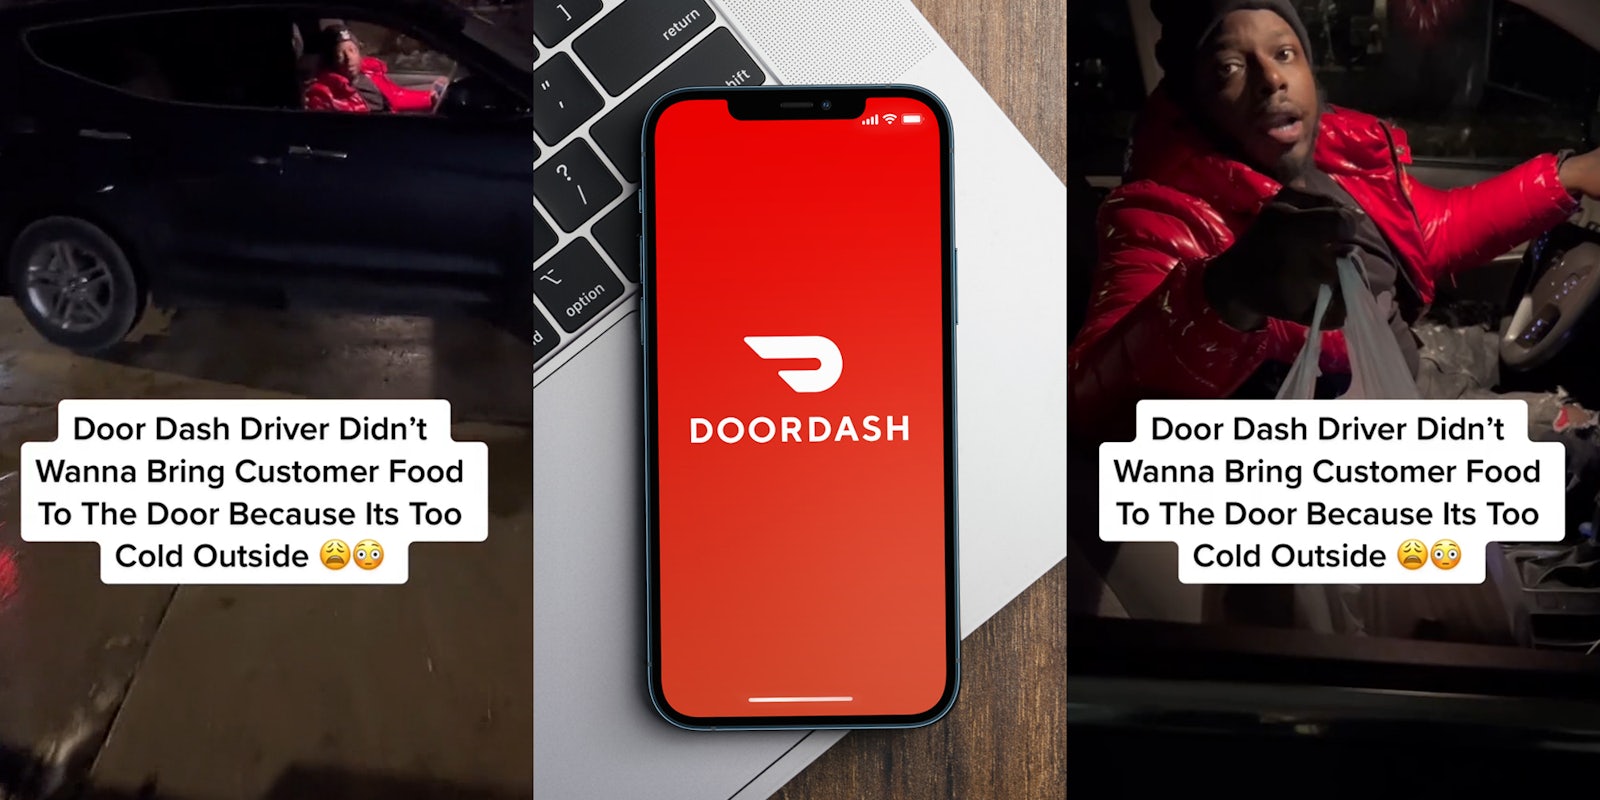 DoorDash driver in car with caption 'Door Dash Driver Didn't Wanna Bring Customer Food To The Door Because Its Too Cold Outside' (l) DoorDash on phone on laptop keyboard (c) DoorDash driver in car with caption 'Door Dash Driver Didn't Wanna Bring Customer Food To The Door Because Its Too Cold Outside' (r)